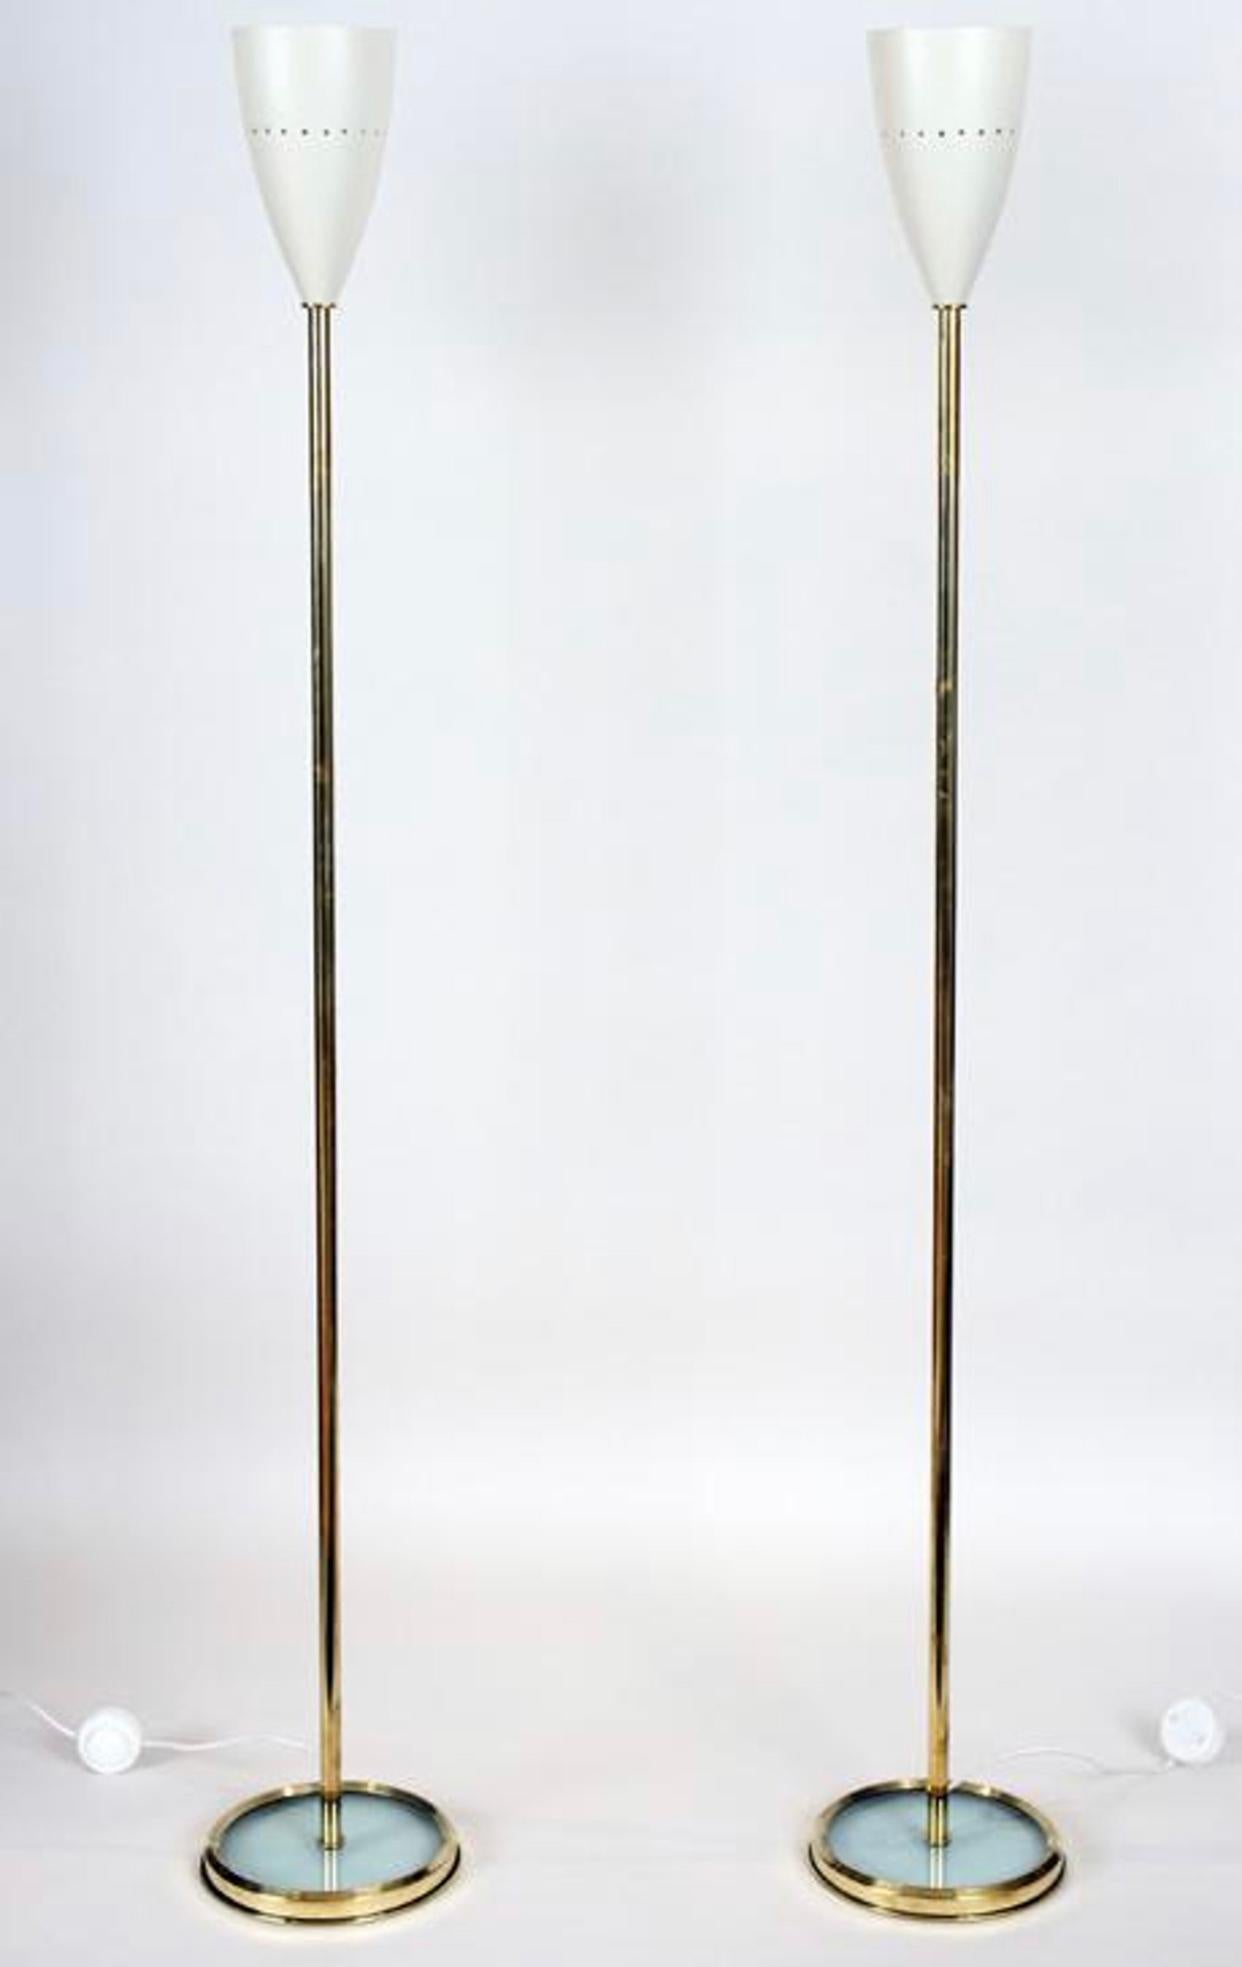 20th Century Pair of Italian Brass Floor Lamps with Metal Shades